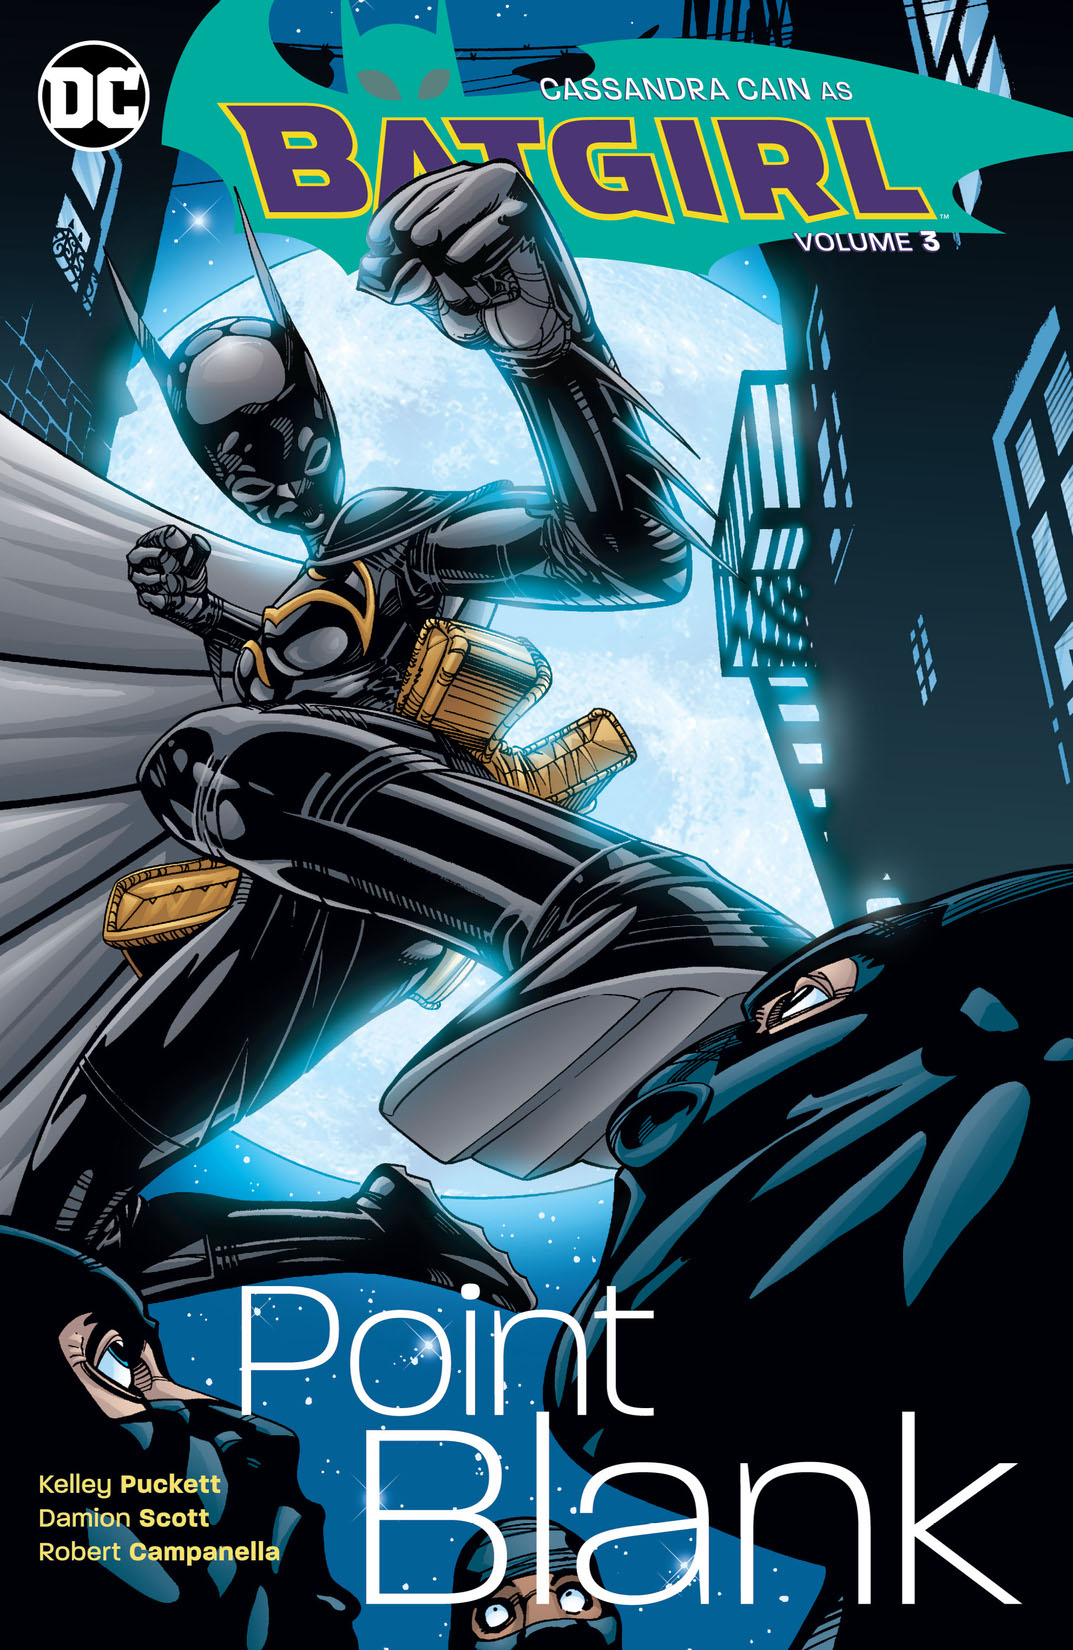 Batgirl Vol. 3: Point Blank preview images